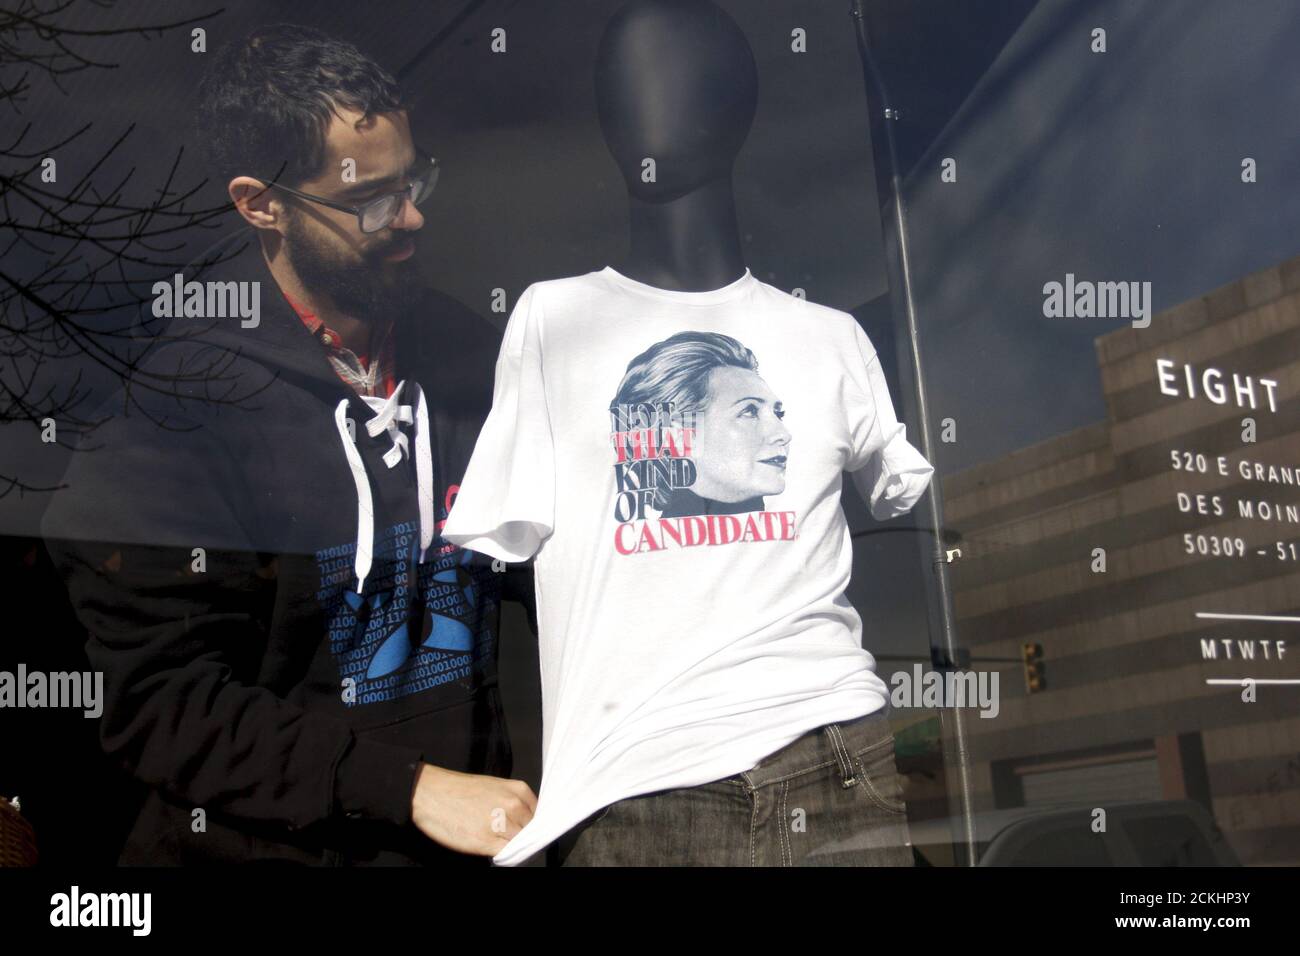 Levi Biel places a shirt of . Democratic presidential candidate Hillary  Clinton on a mannequin before actress and screenwriter Lena Dunham speaks  at Eight Seven Central screen printers in Des Moines, Iowa,